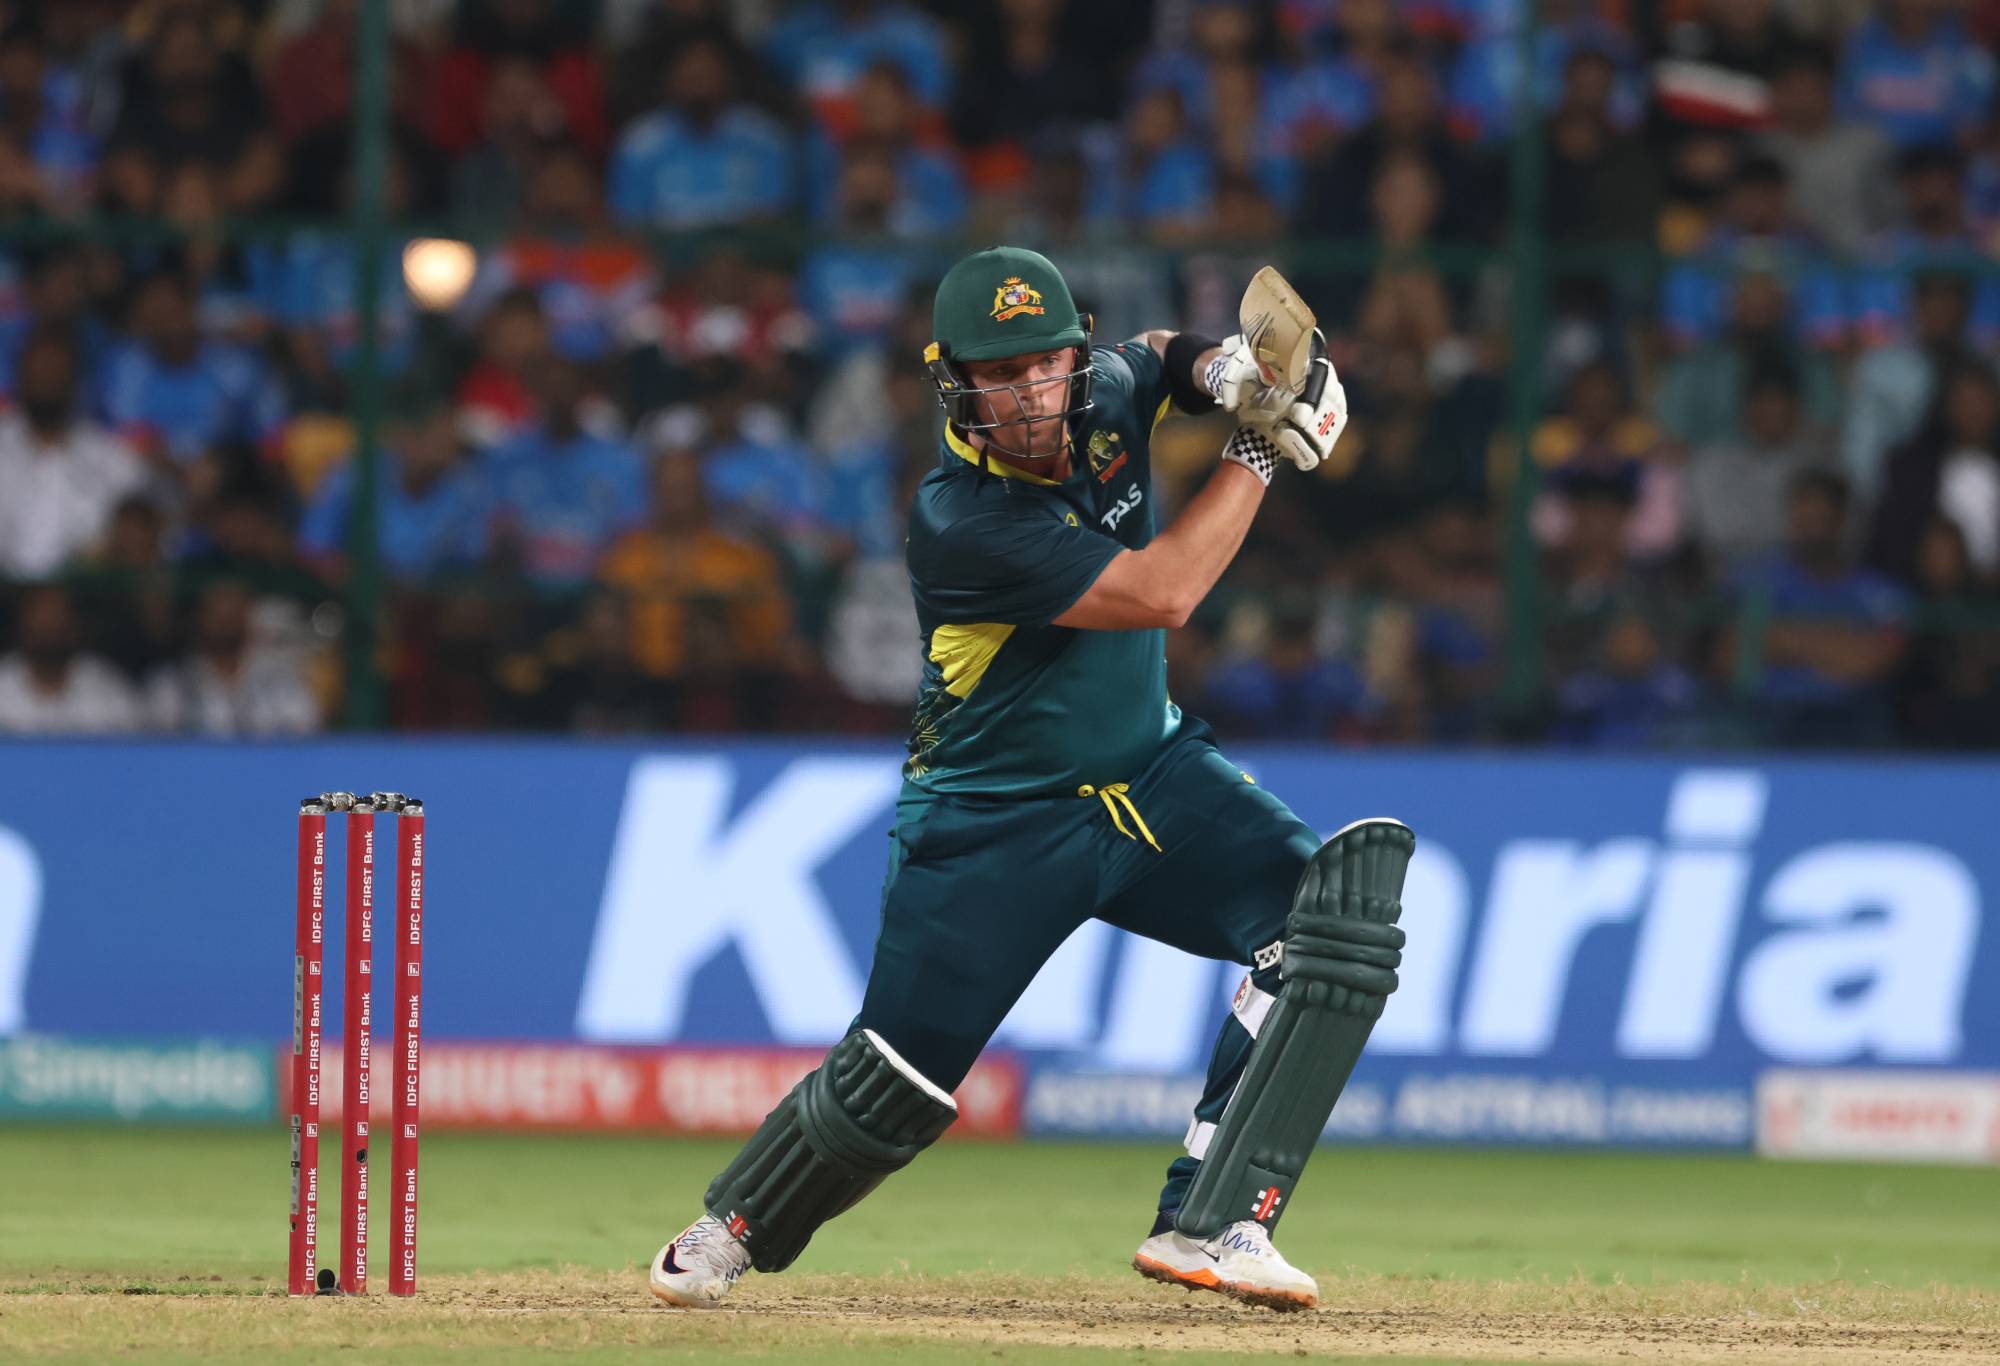 BANGALORE, INDIA - DECEMBER 3: Ben McDermott of Australia plays a shot during game five of the T20 International series between India and Australia at M. Chinnaswamy Stadium on December 3, 2023 in Bangalore, India. (Photo by Pankaj Nangia/Getty Images)